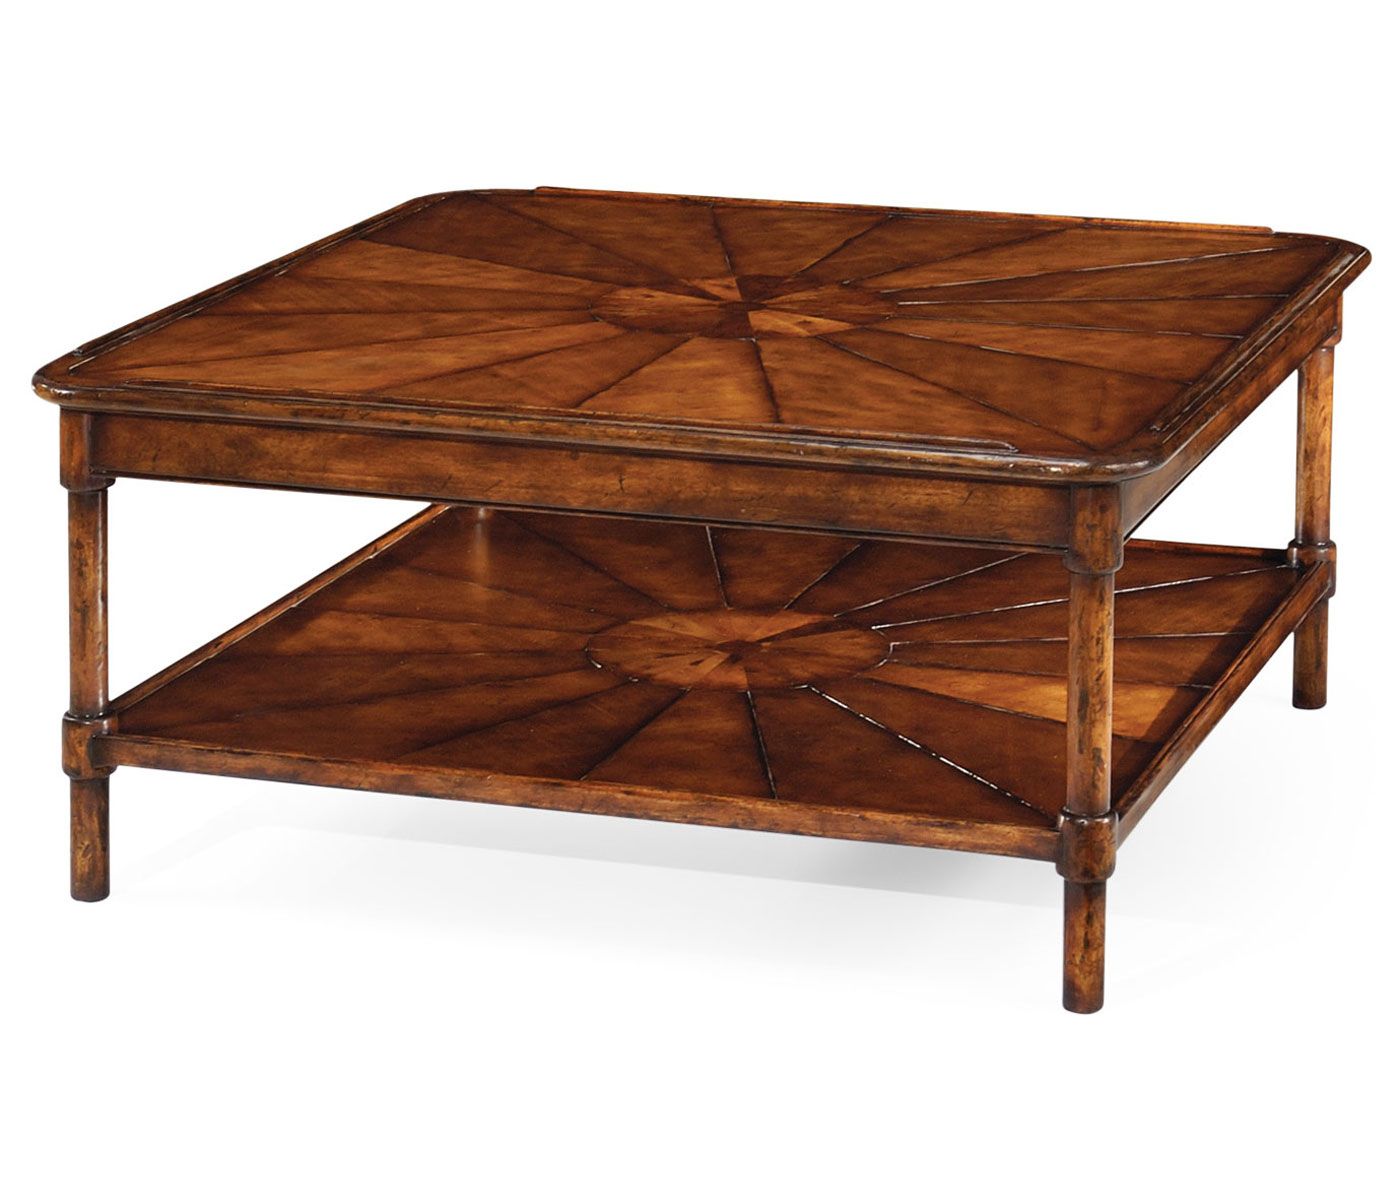 Square Rustic Walnut Coffee Table For Most Current Hand Finished Walnut Coffee Tables (View 8 of 20)